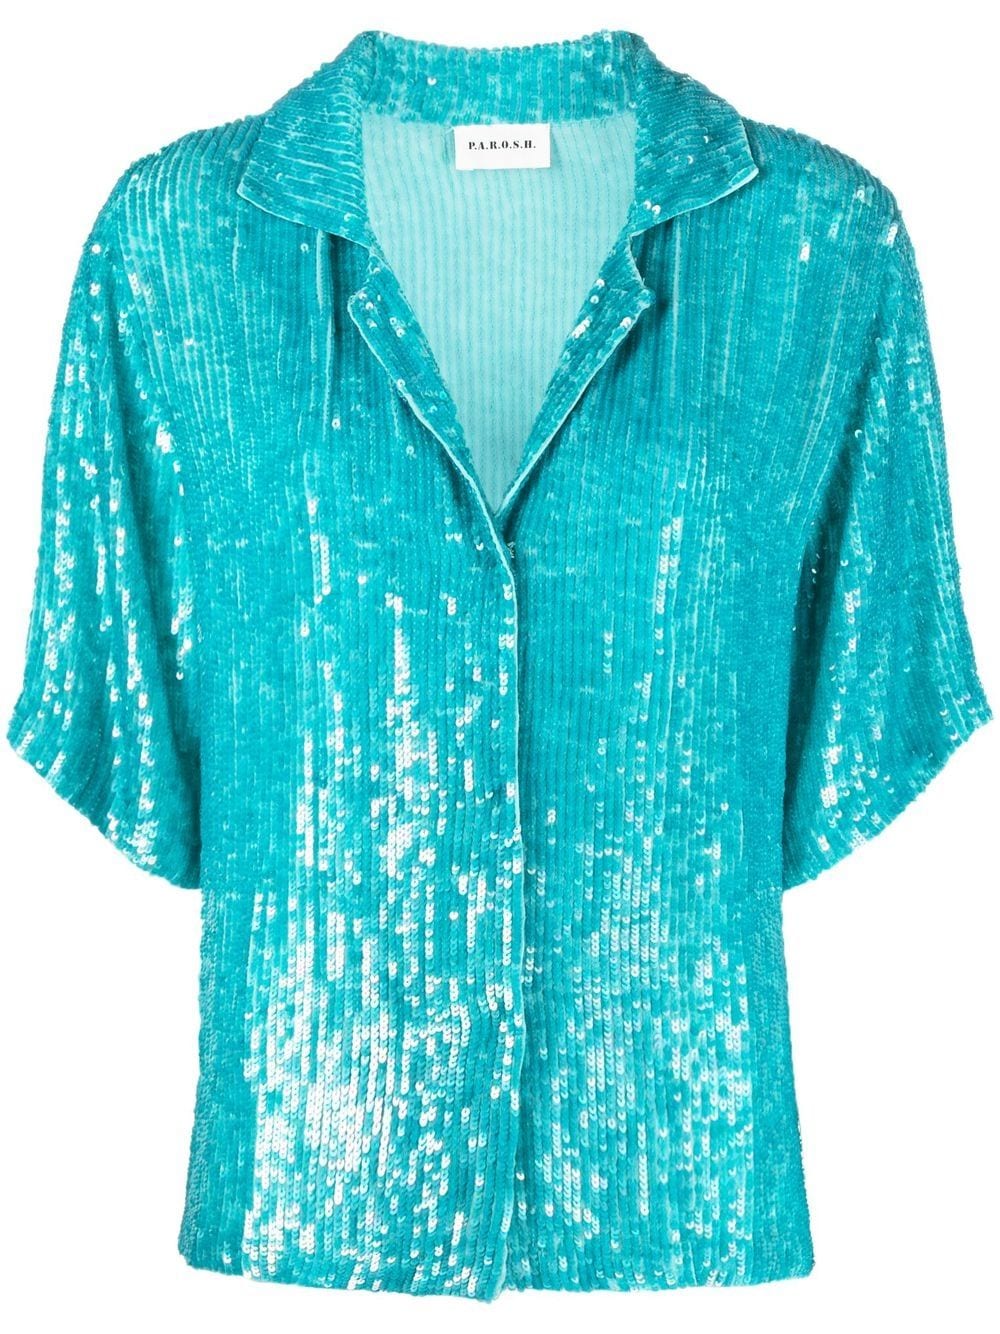 P.a.r.o.s.h Sequin Embellished Shirt In Blue